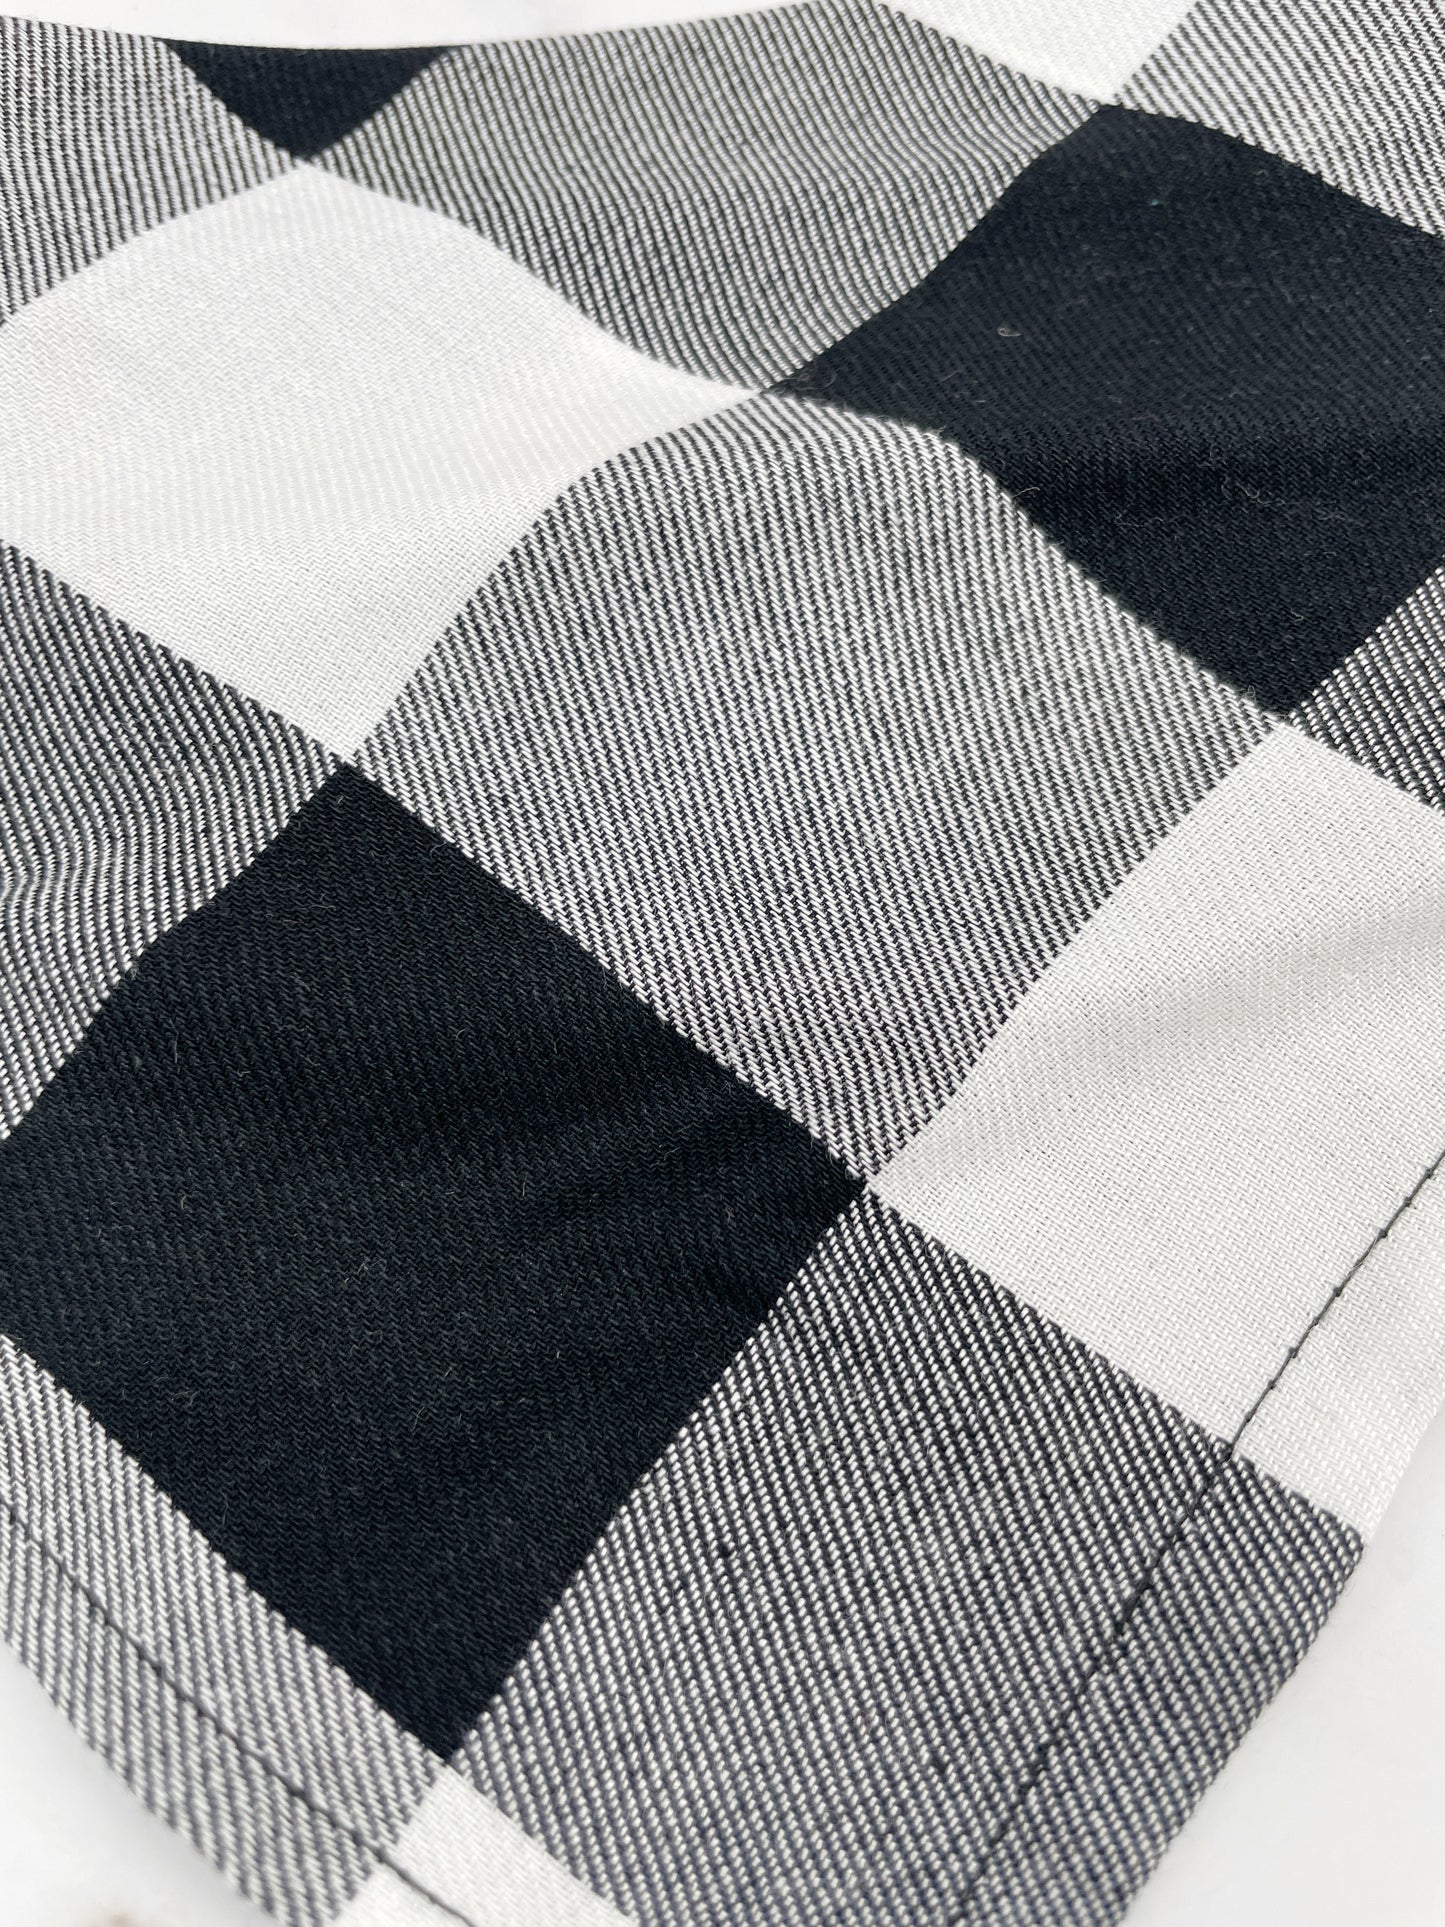 close up of the black and white cotton fabric